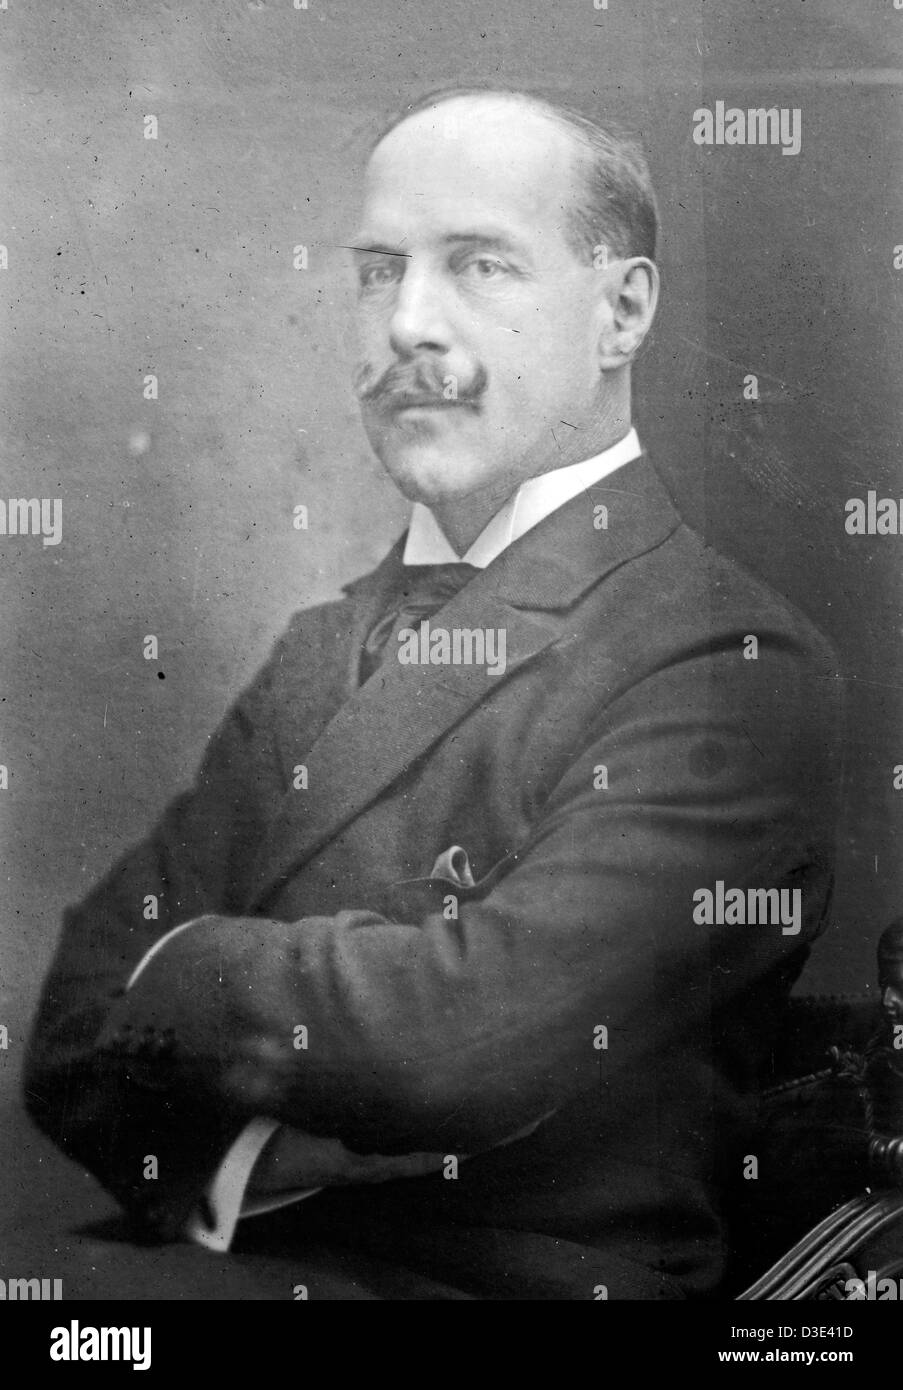 Constantine I (1868-1923), King of Greece from 1913 to 1917 and from 1920 to 1922. Stock Photo